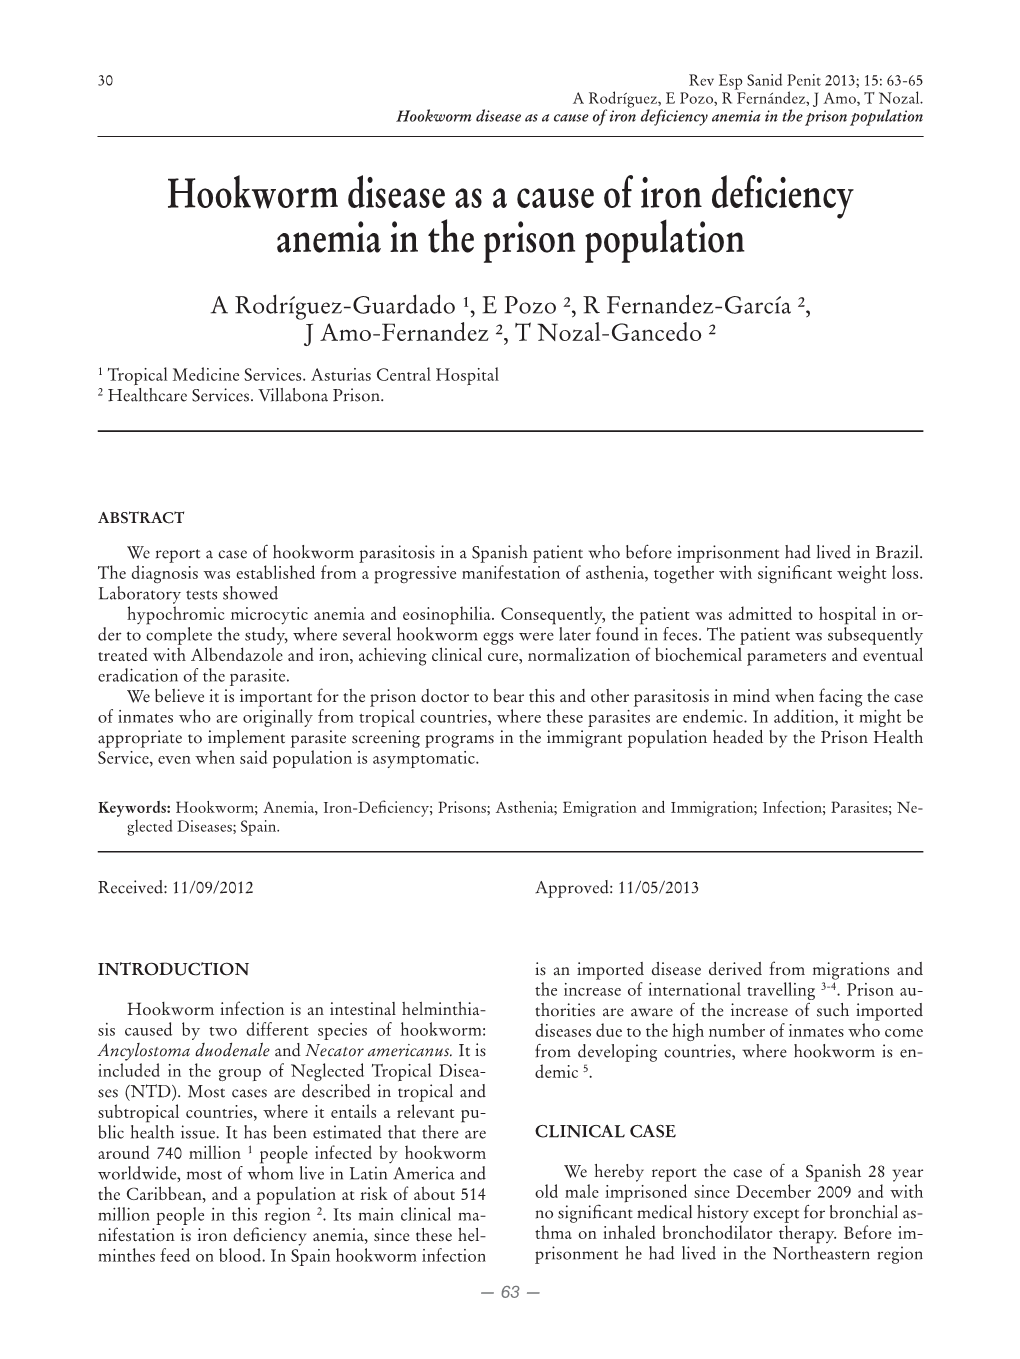 Hookworm Disease As a Cause of Iron Deficiency Anemia in the Prison Population